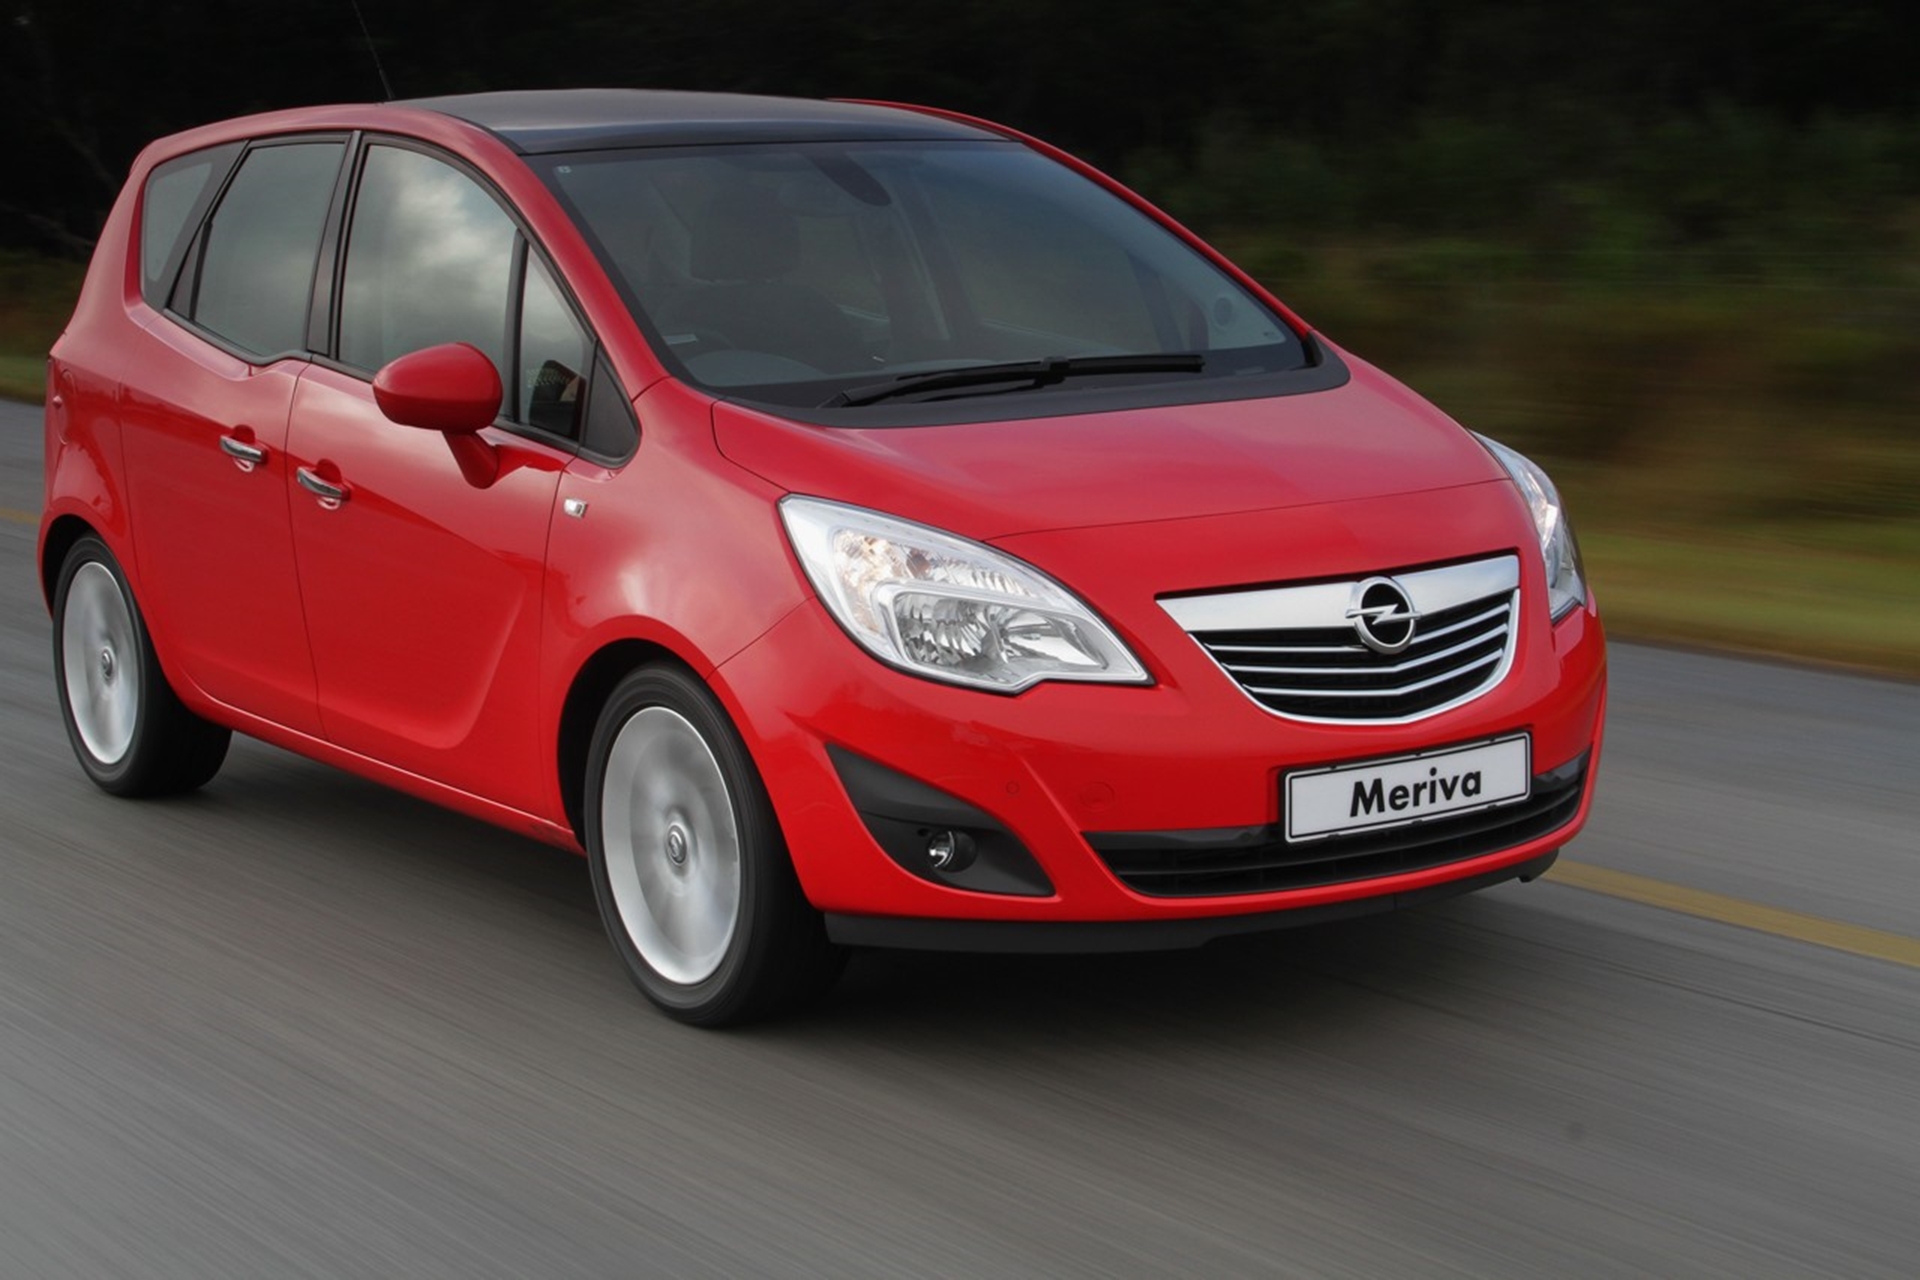 Opel Meriva 1.4T Cosmo Named As A Finalist In The South African Guild Of Motoring Journalists’ 2013 Car Of The Year Awards